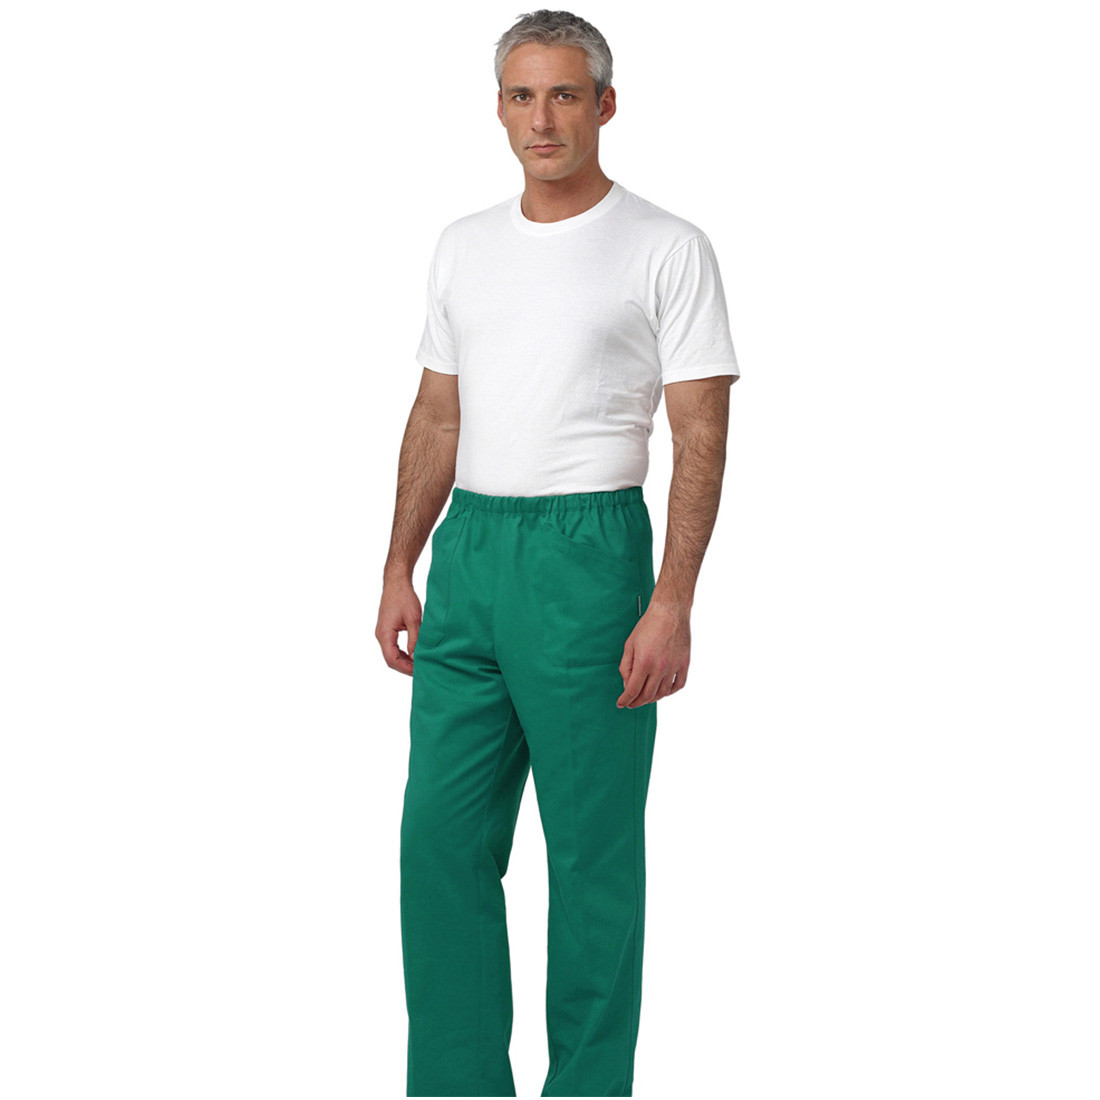 STAR I unisex medical trousers - Safetywear